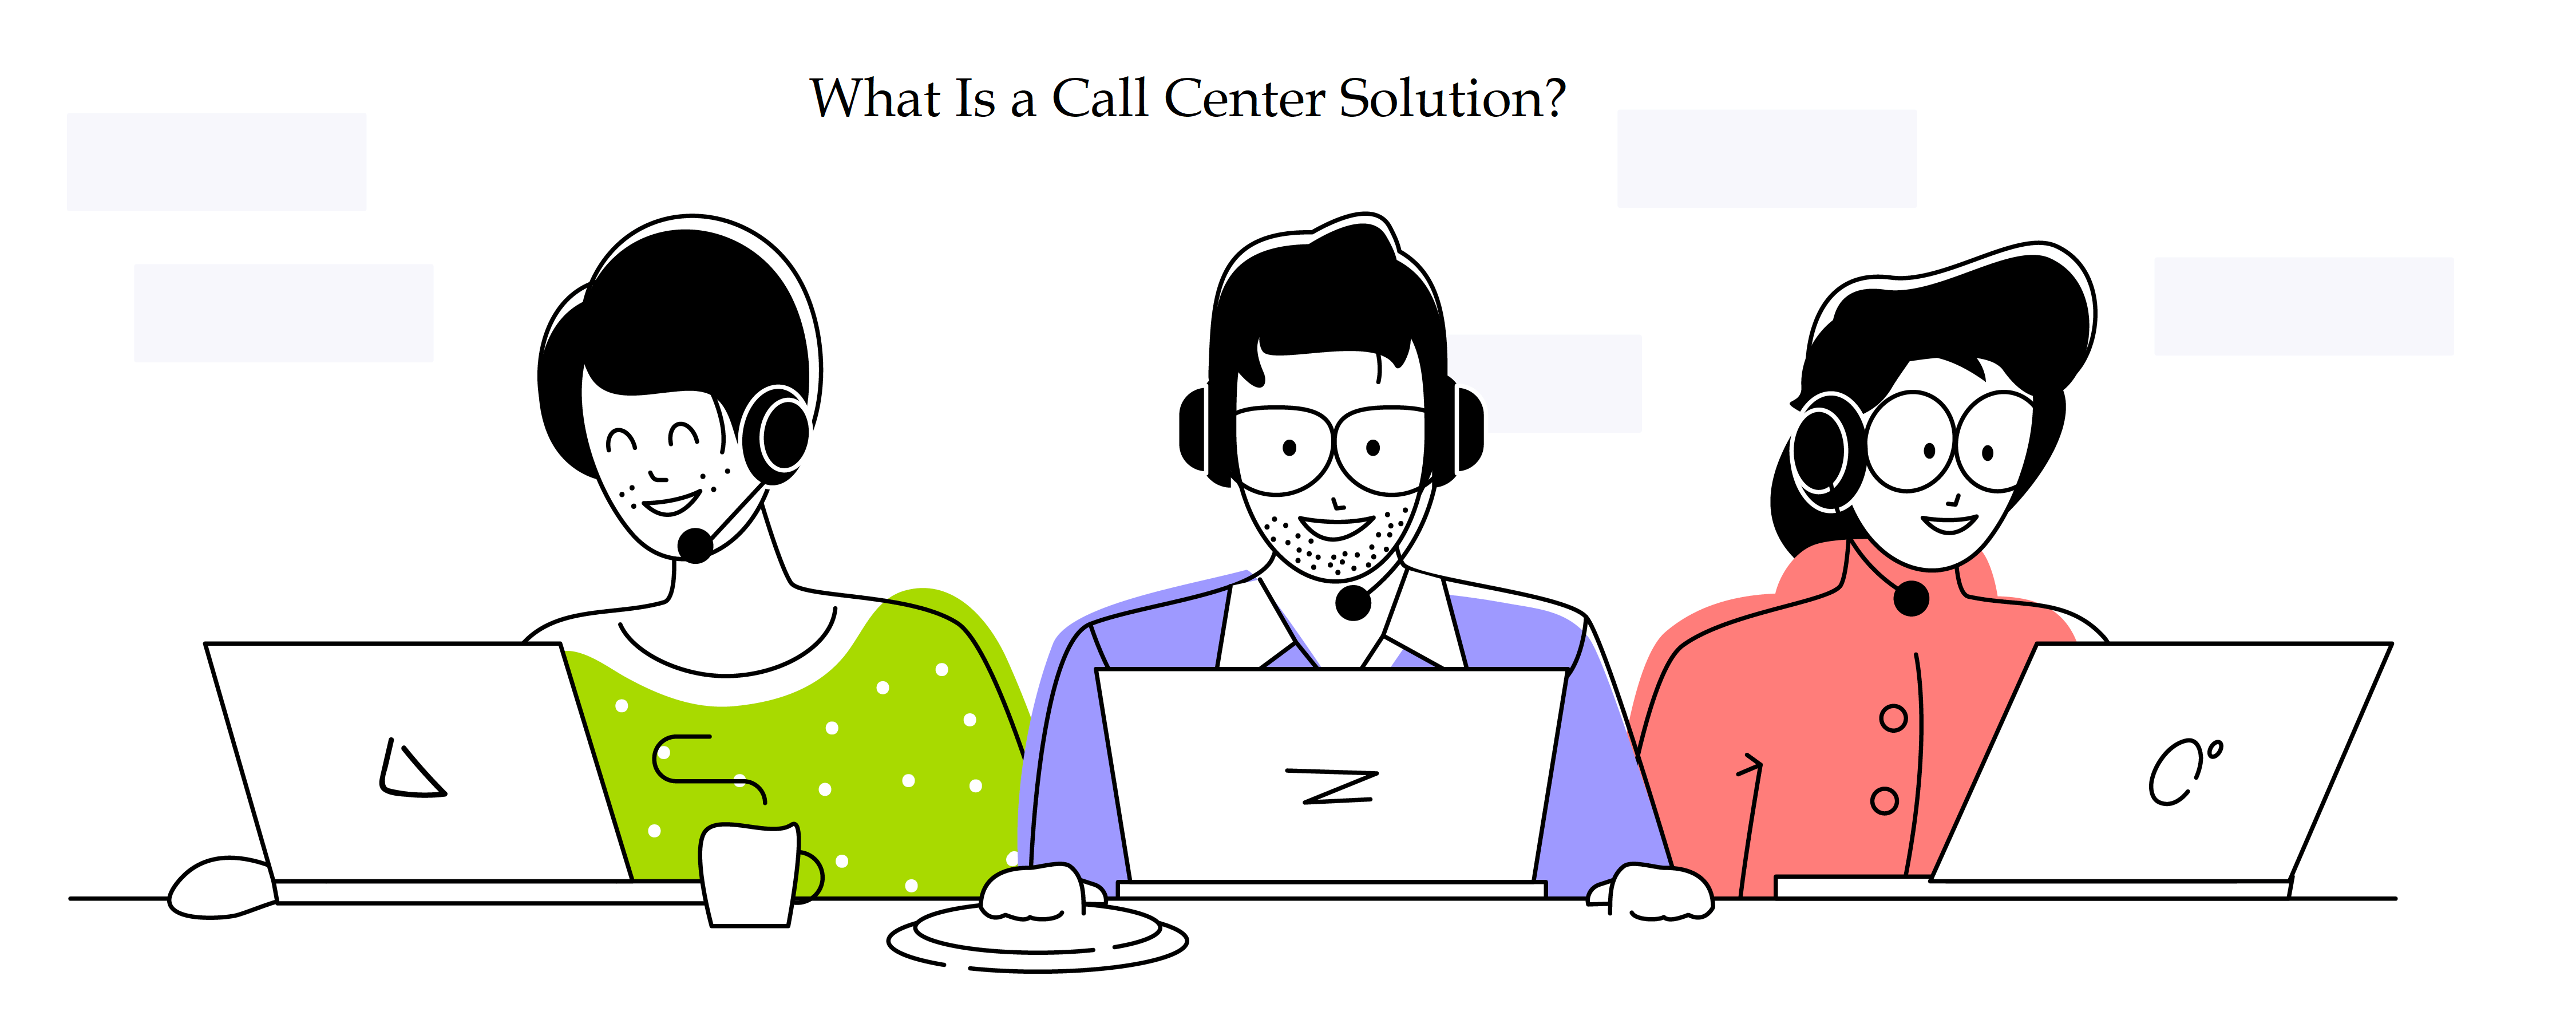 What Is a Call Center Solution?